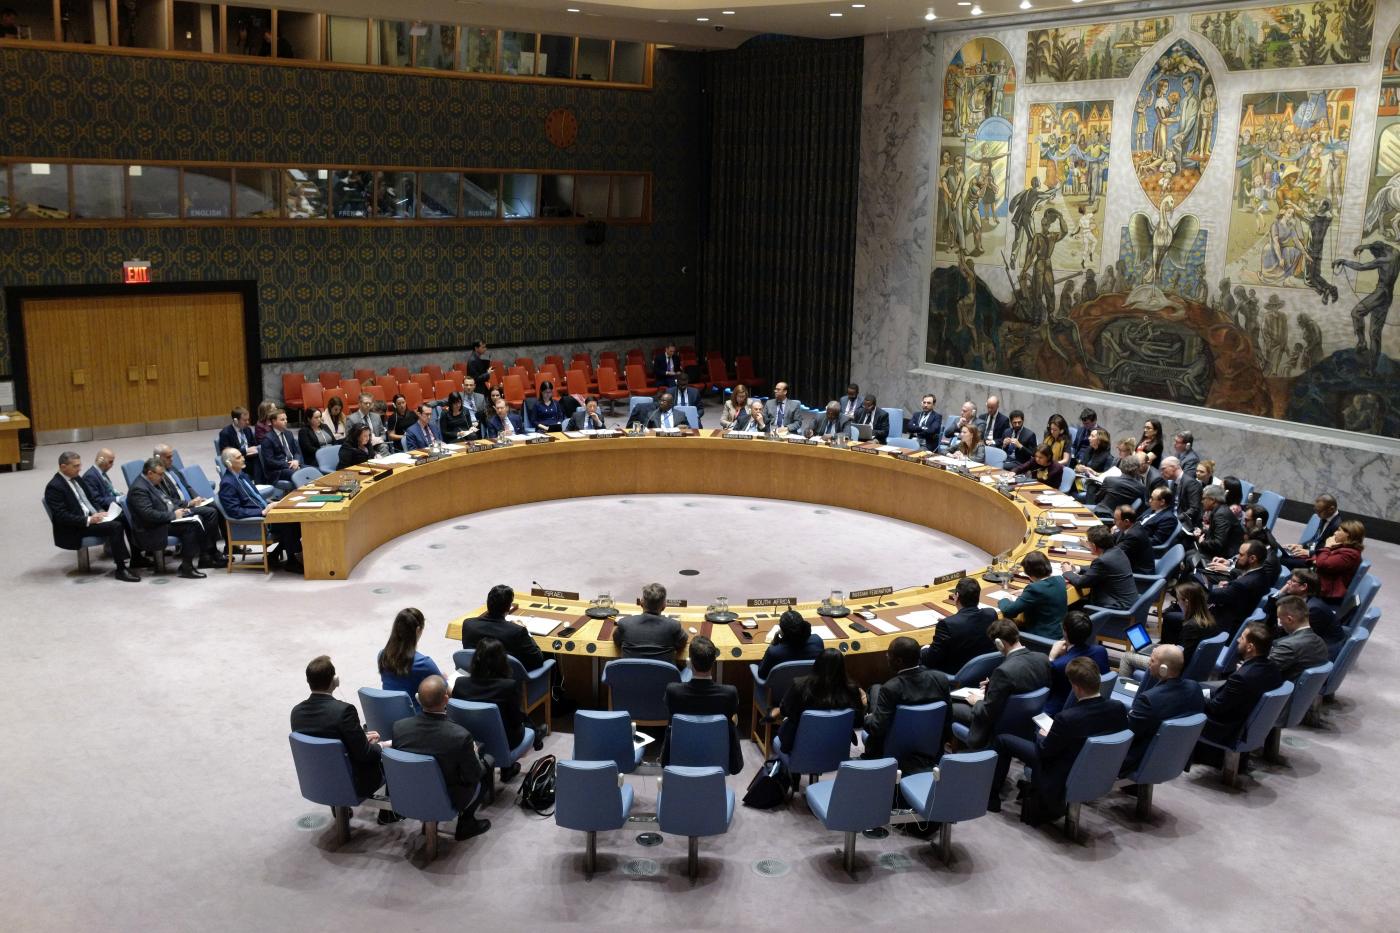 UN-SECURITY COUNCIL-MIDDLE EAST-GOLAN HEIGHTS by LI MUZI. 